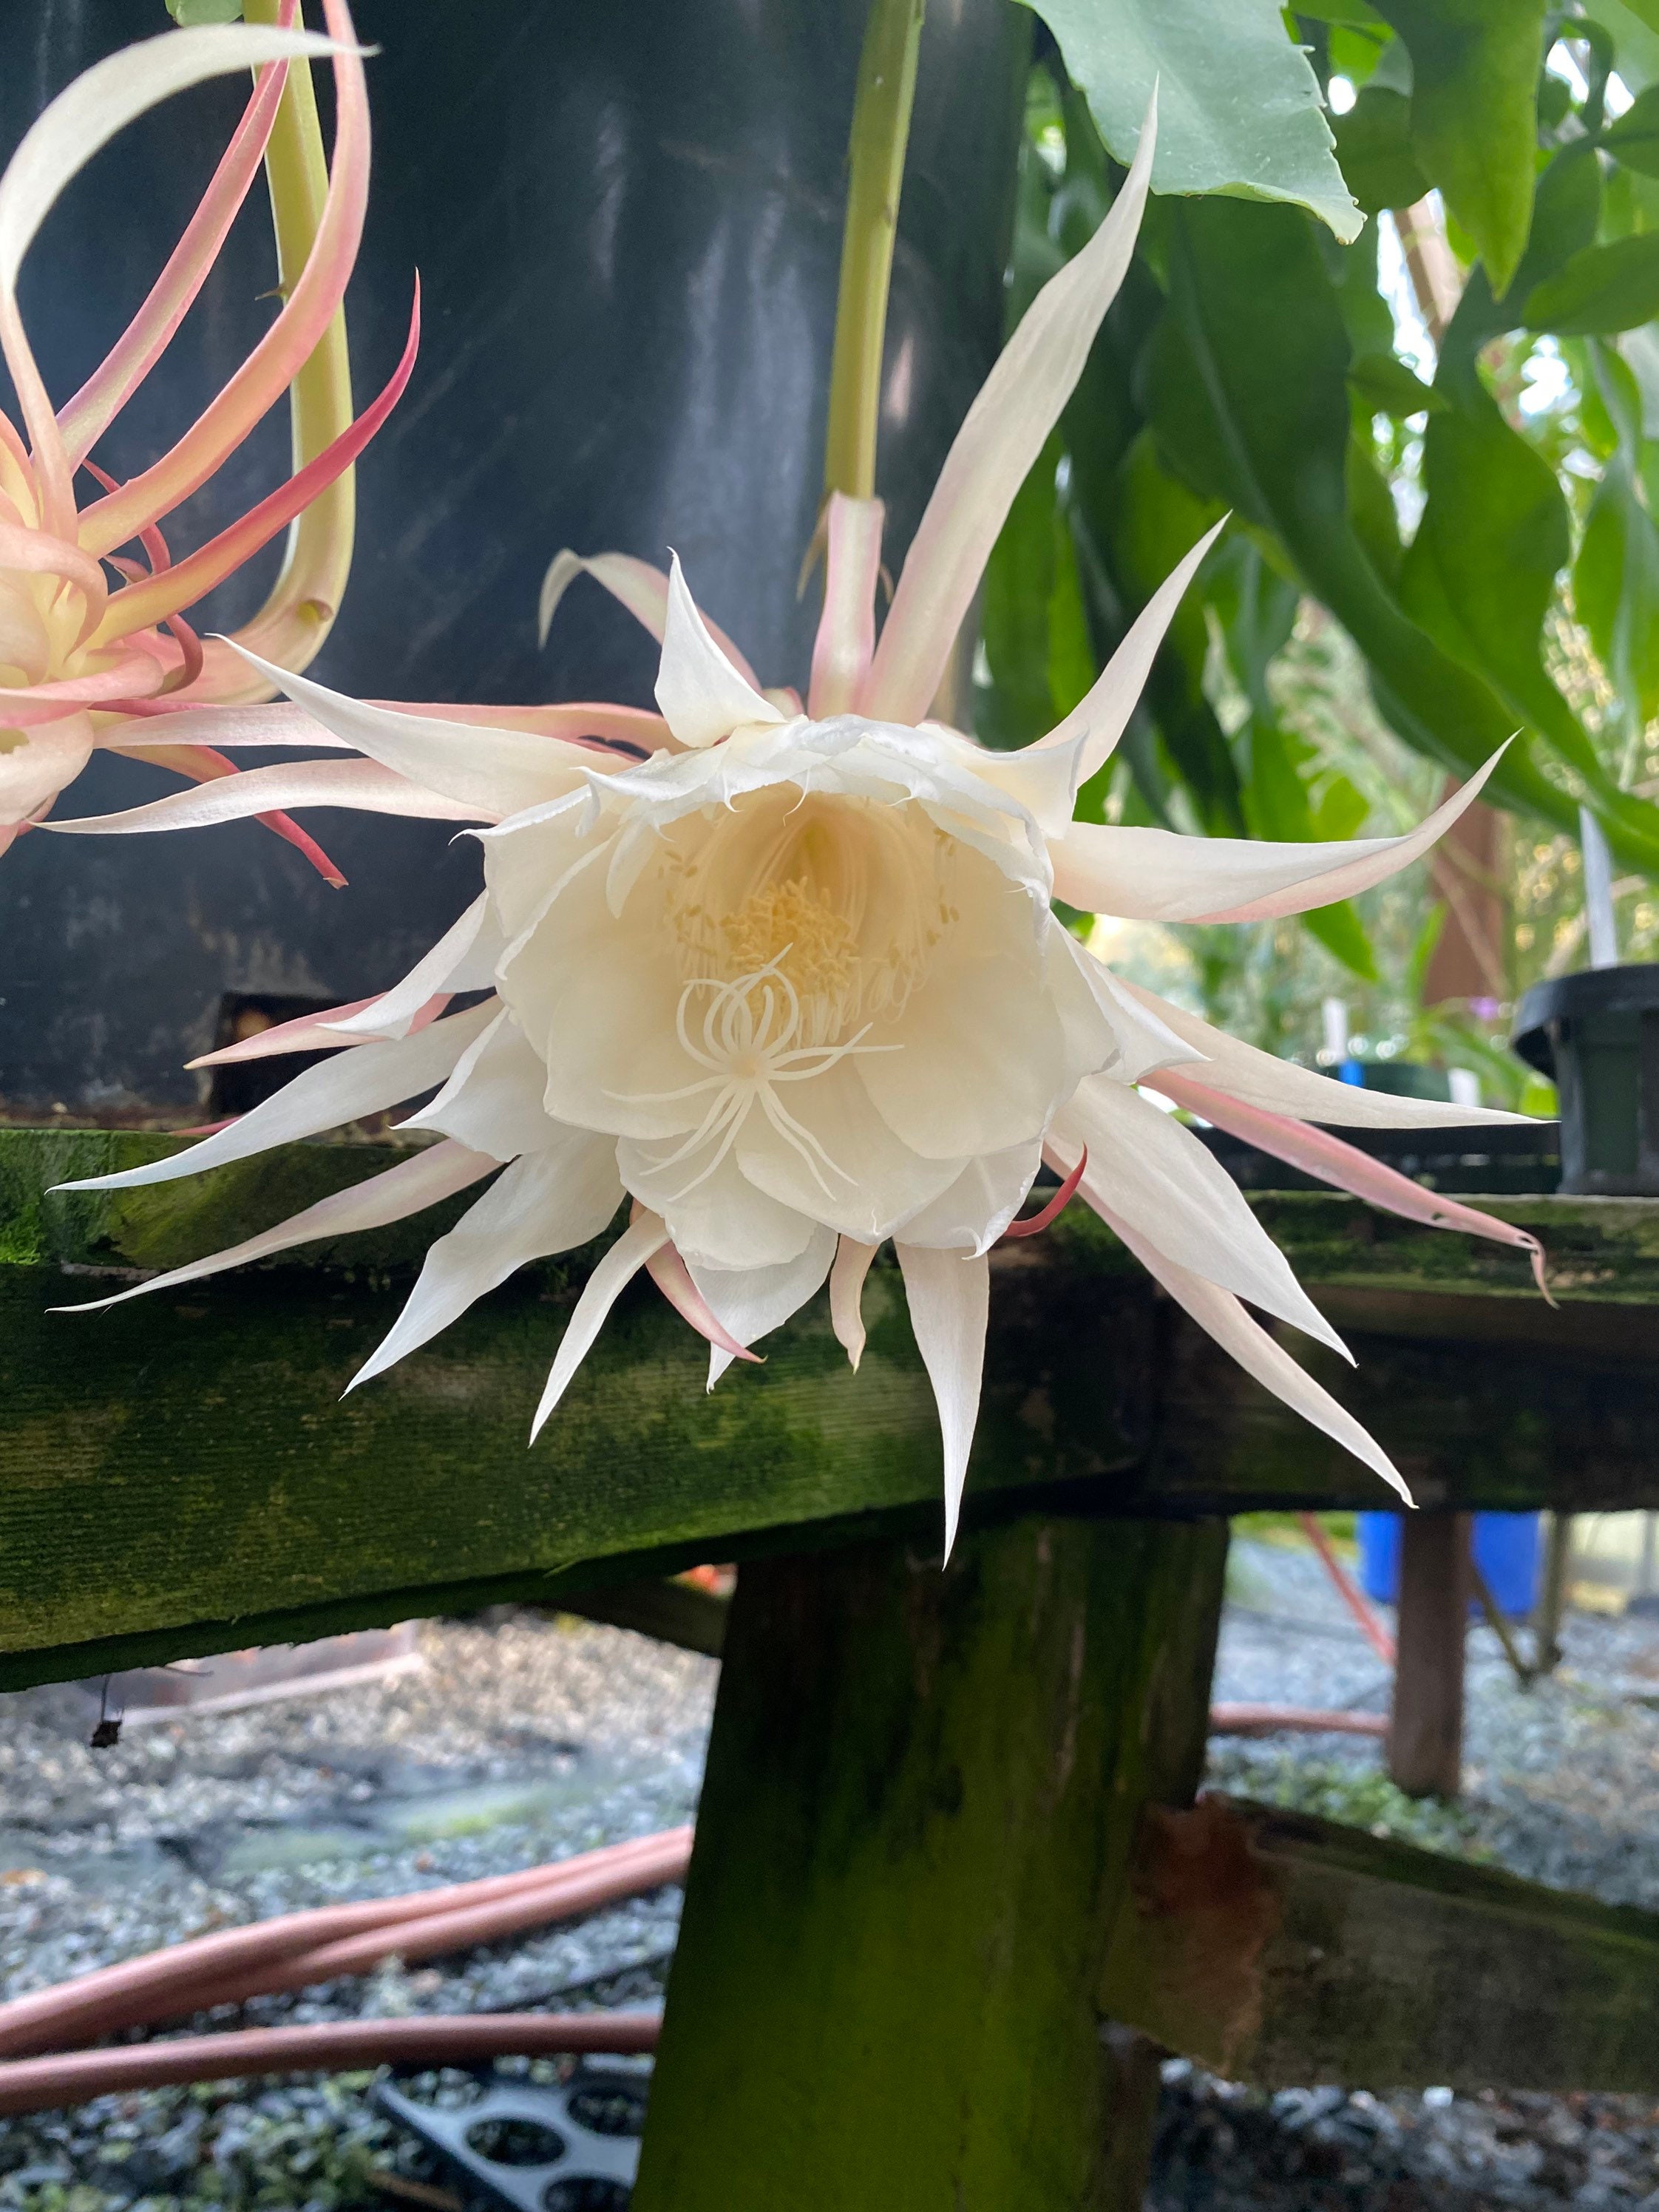 Epiphyllum Oxypetalum 4 Not Rooted HUGE White Fragrant Flowers